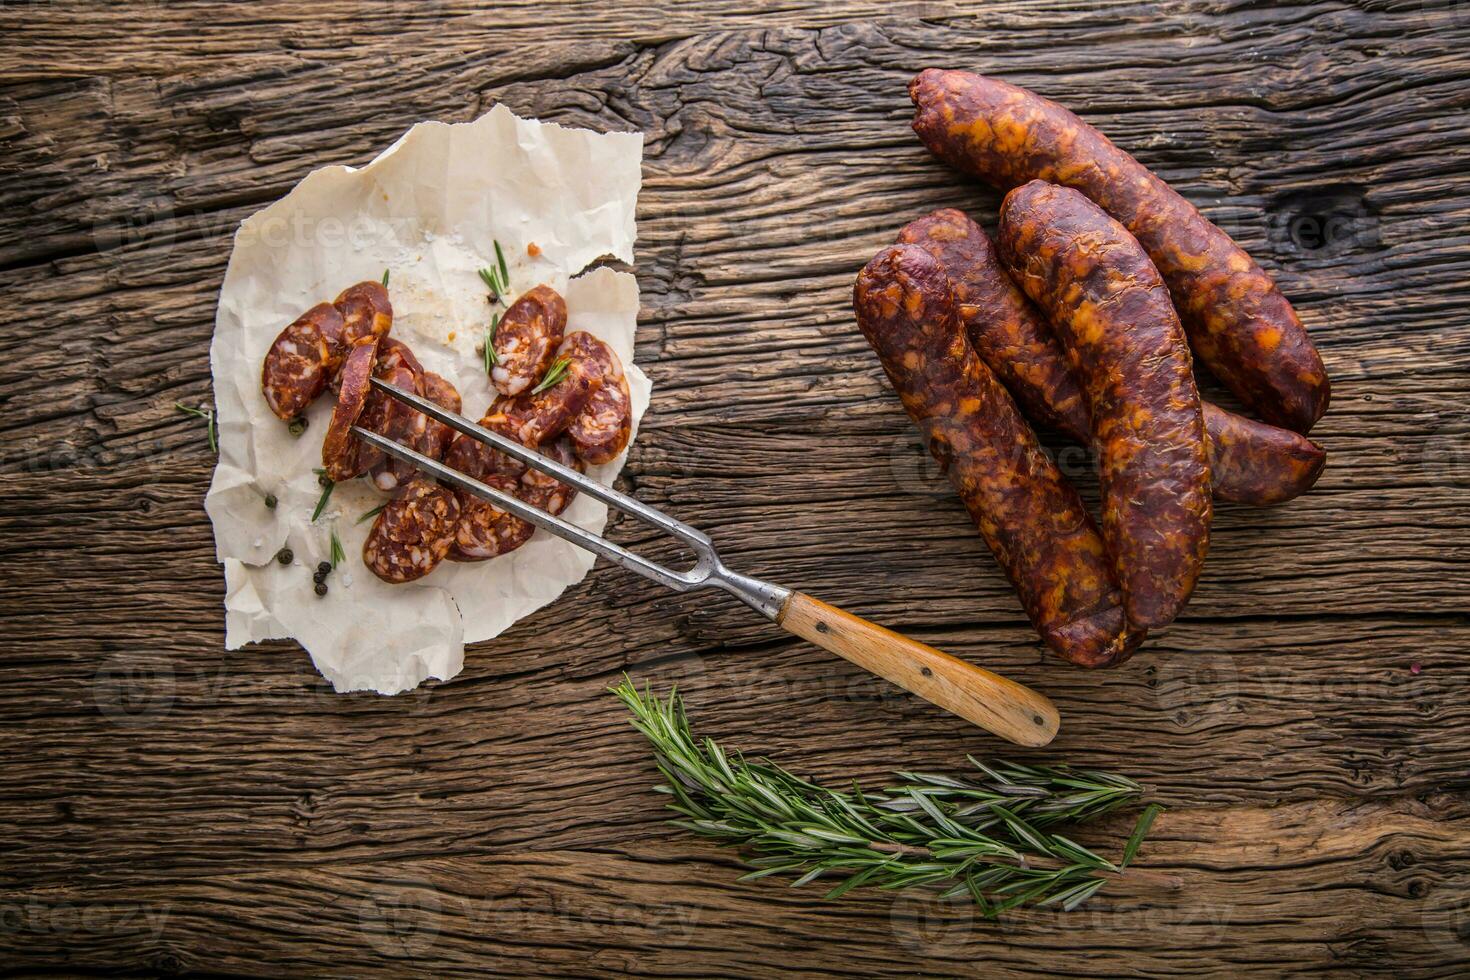 Sausages. Smoked Sausages. Chorizo sausages with vegetable rosemary spices and kitchen utensil. photo